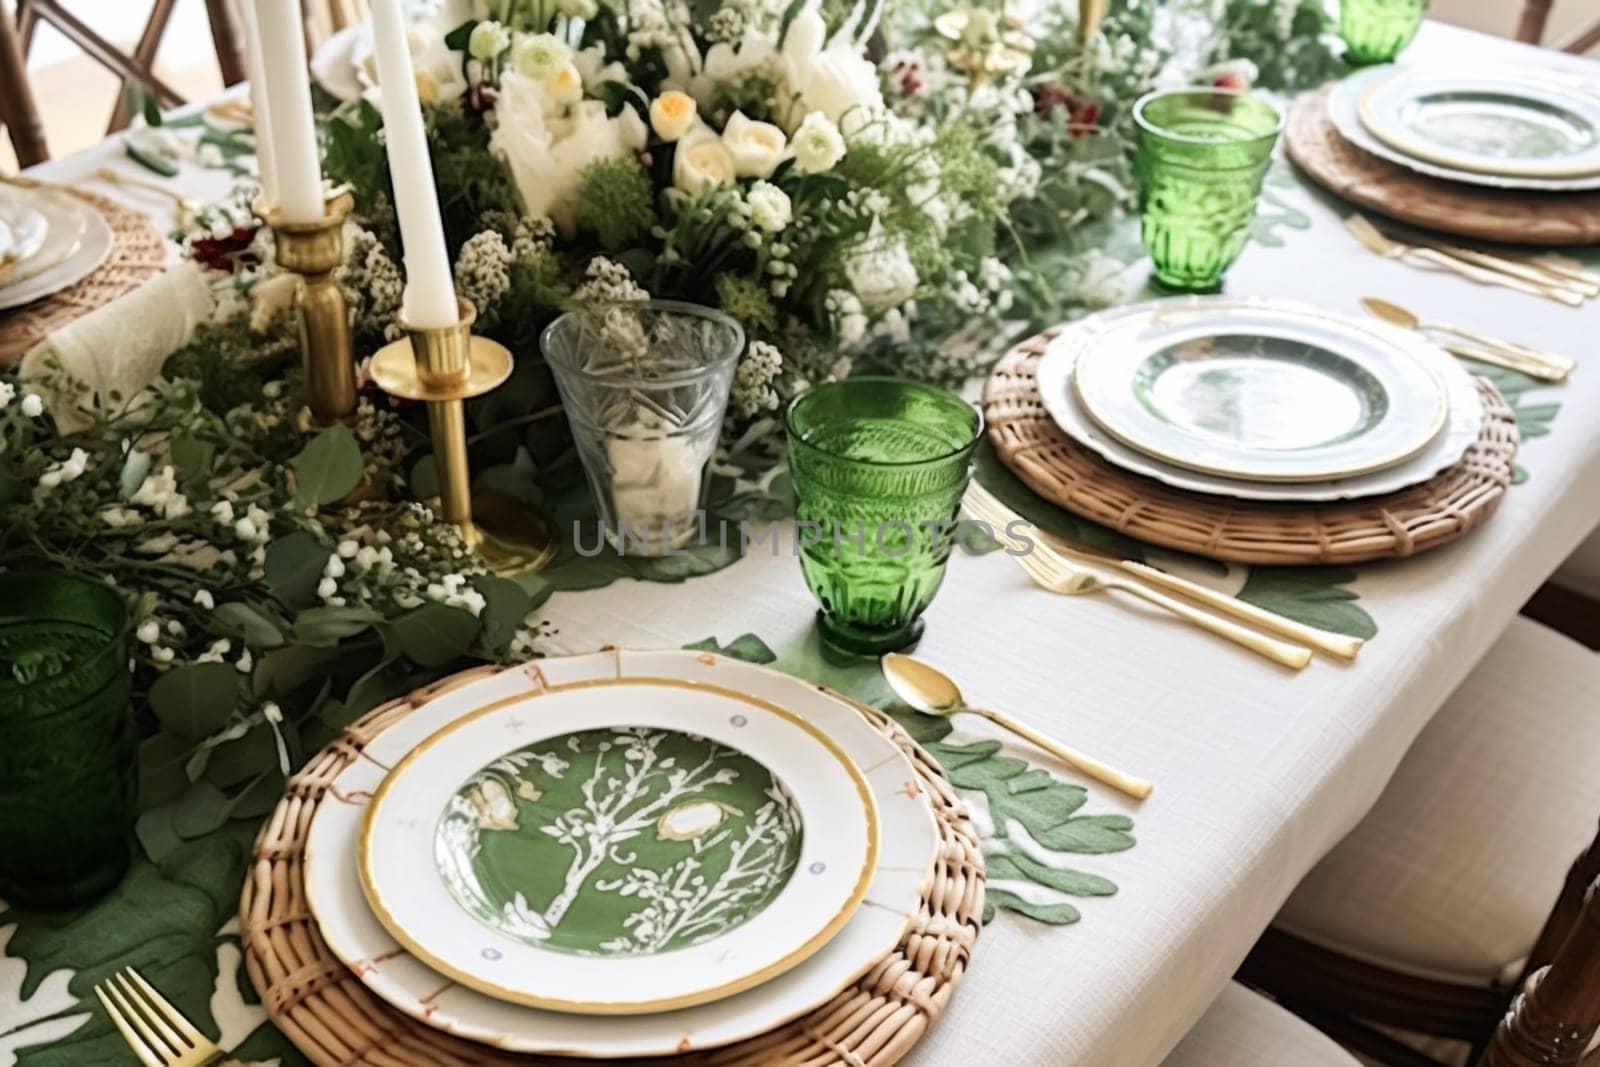 Green and white table decor, holiday tablescape and dinner table setting, formal event decoration for wedding, family celebration, English country and home styling inspiration